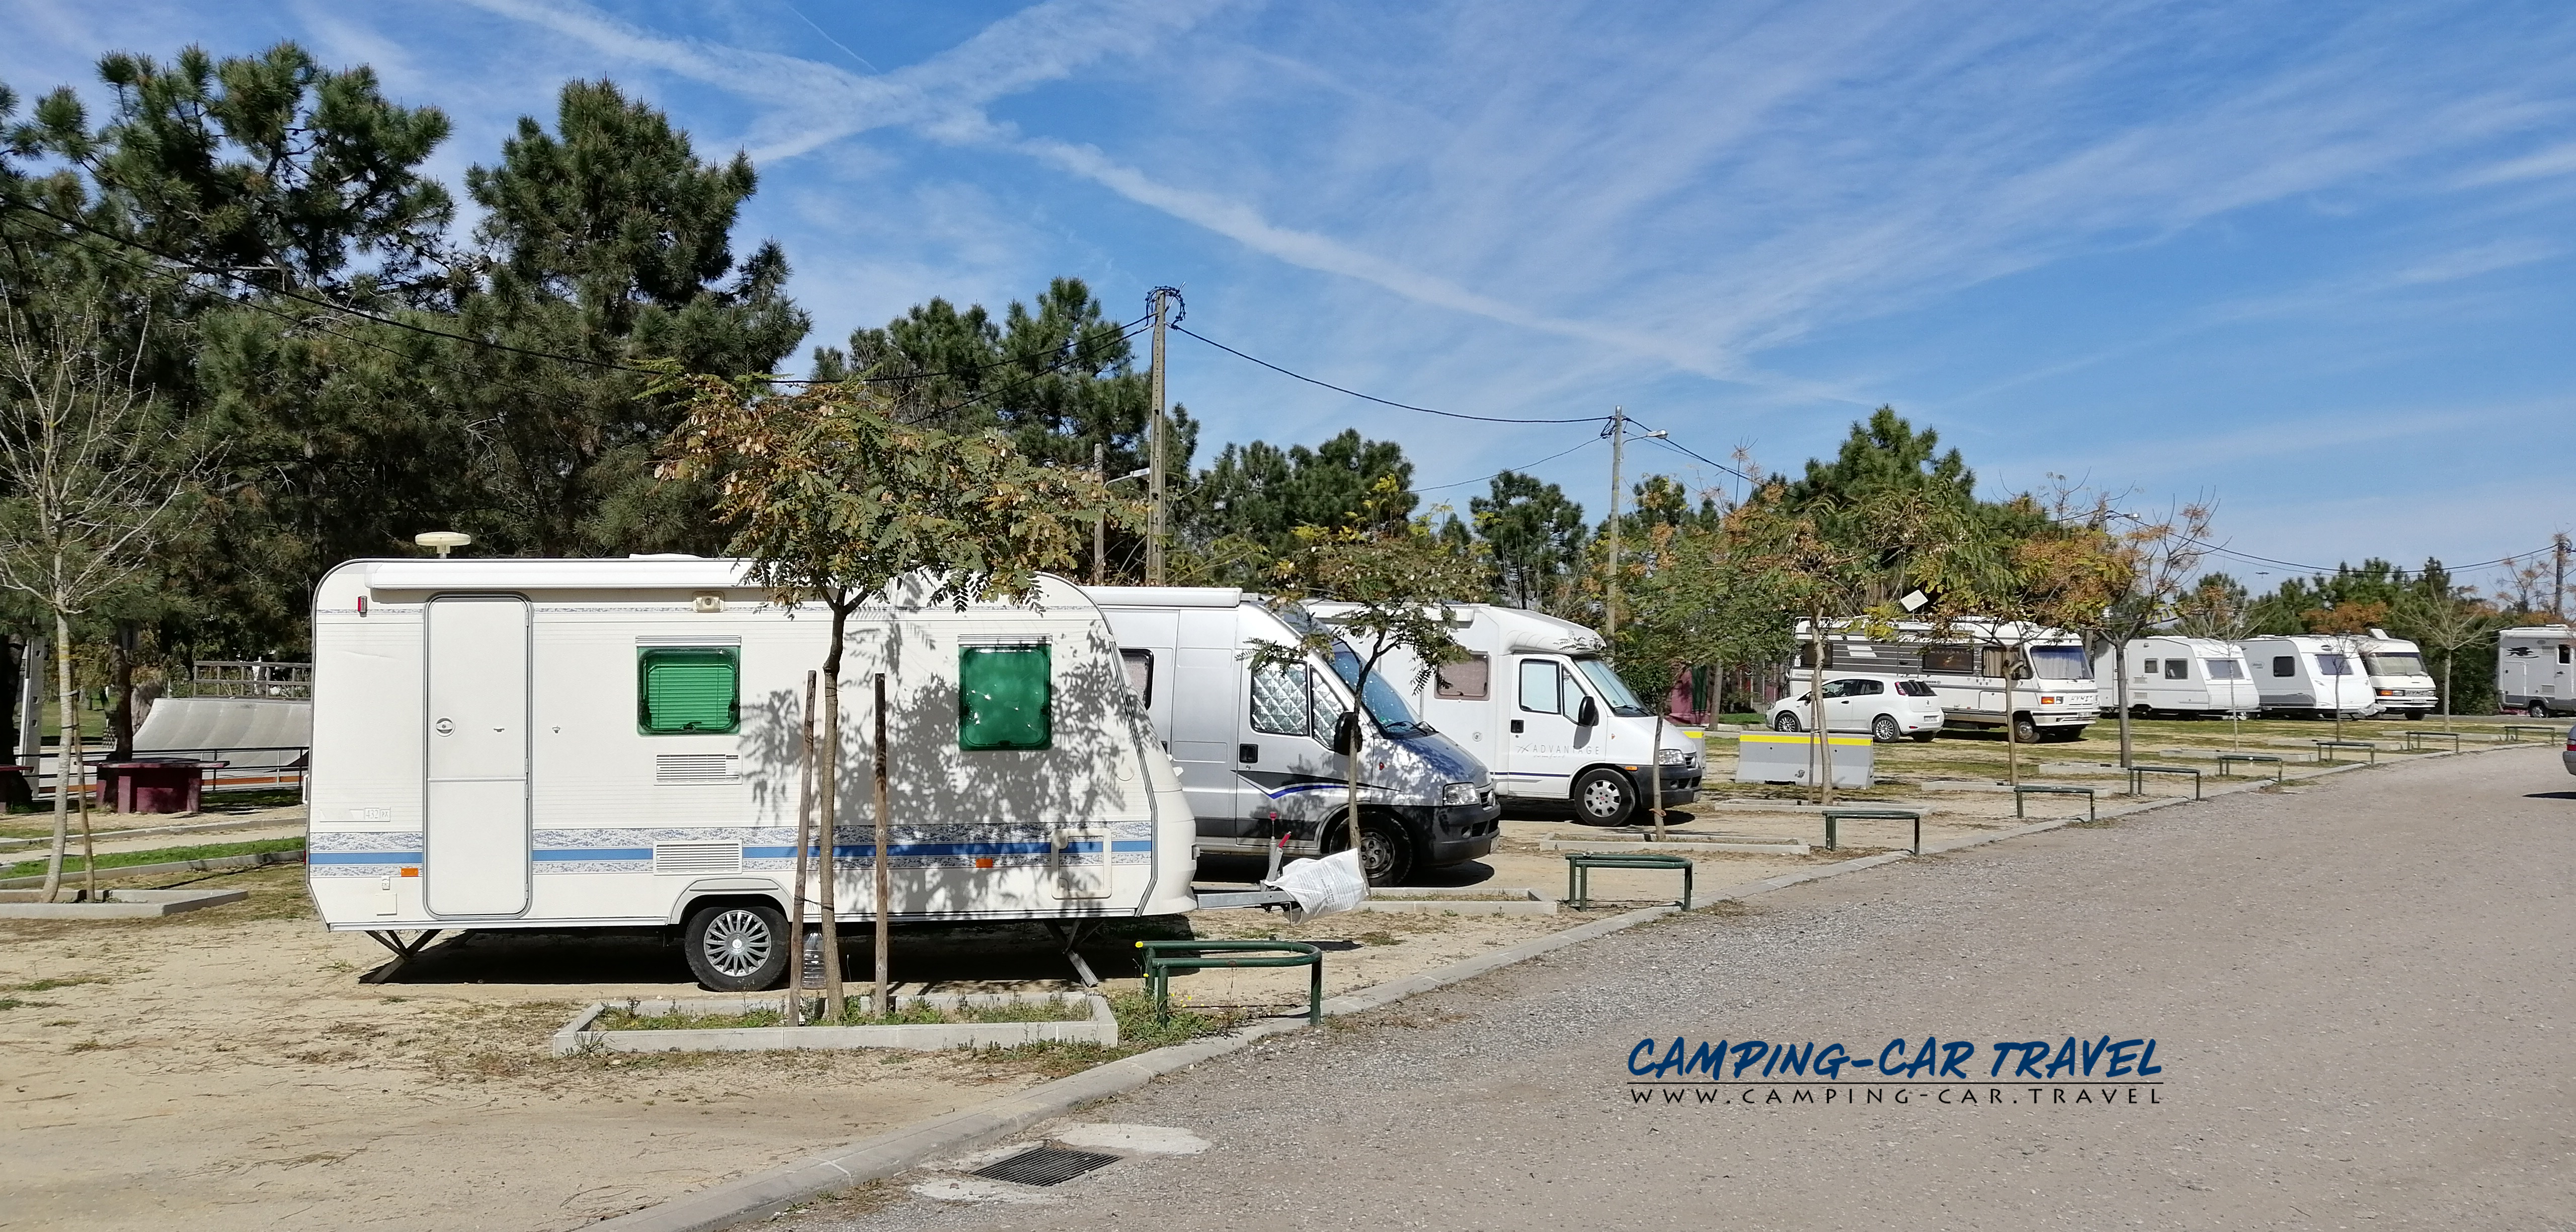 aire services camping car Corroios Portugal